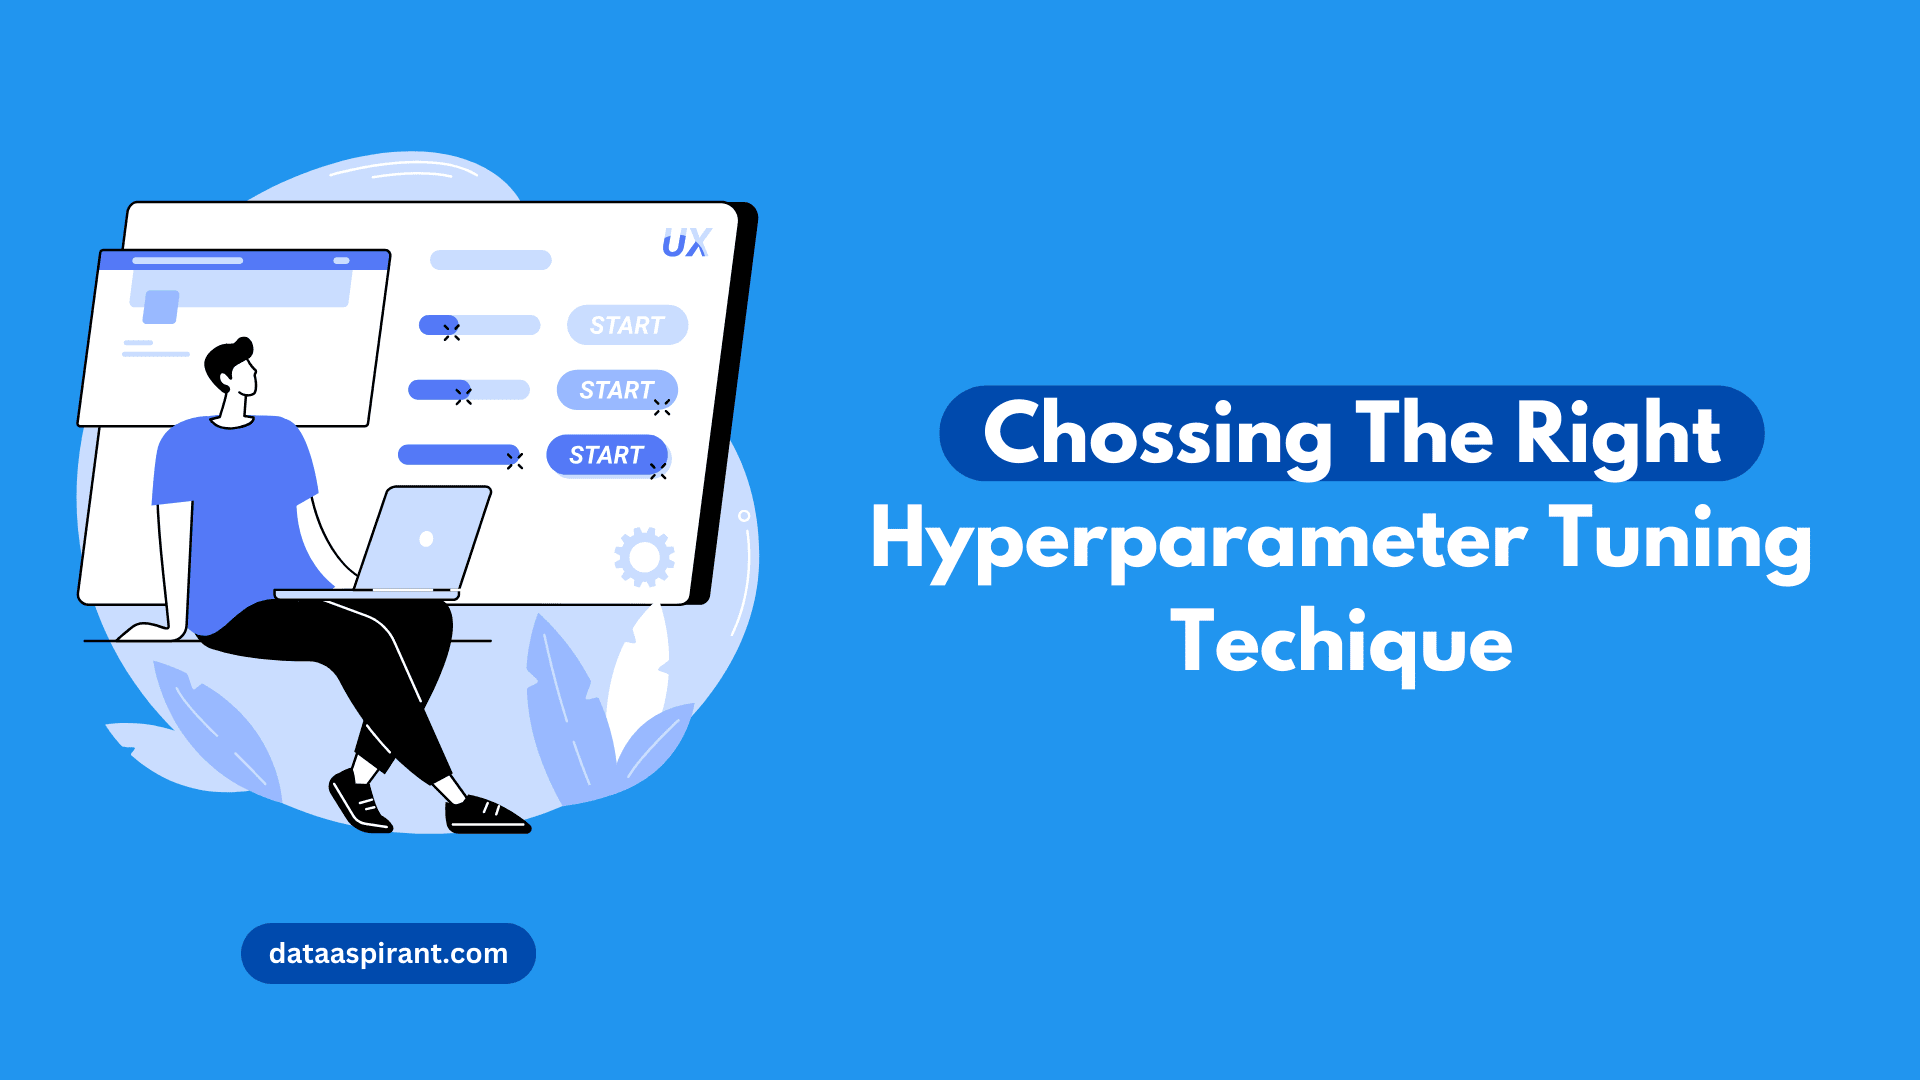 When to use these Hyperparameter Tuning Techniques